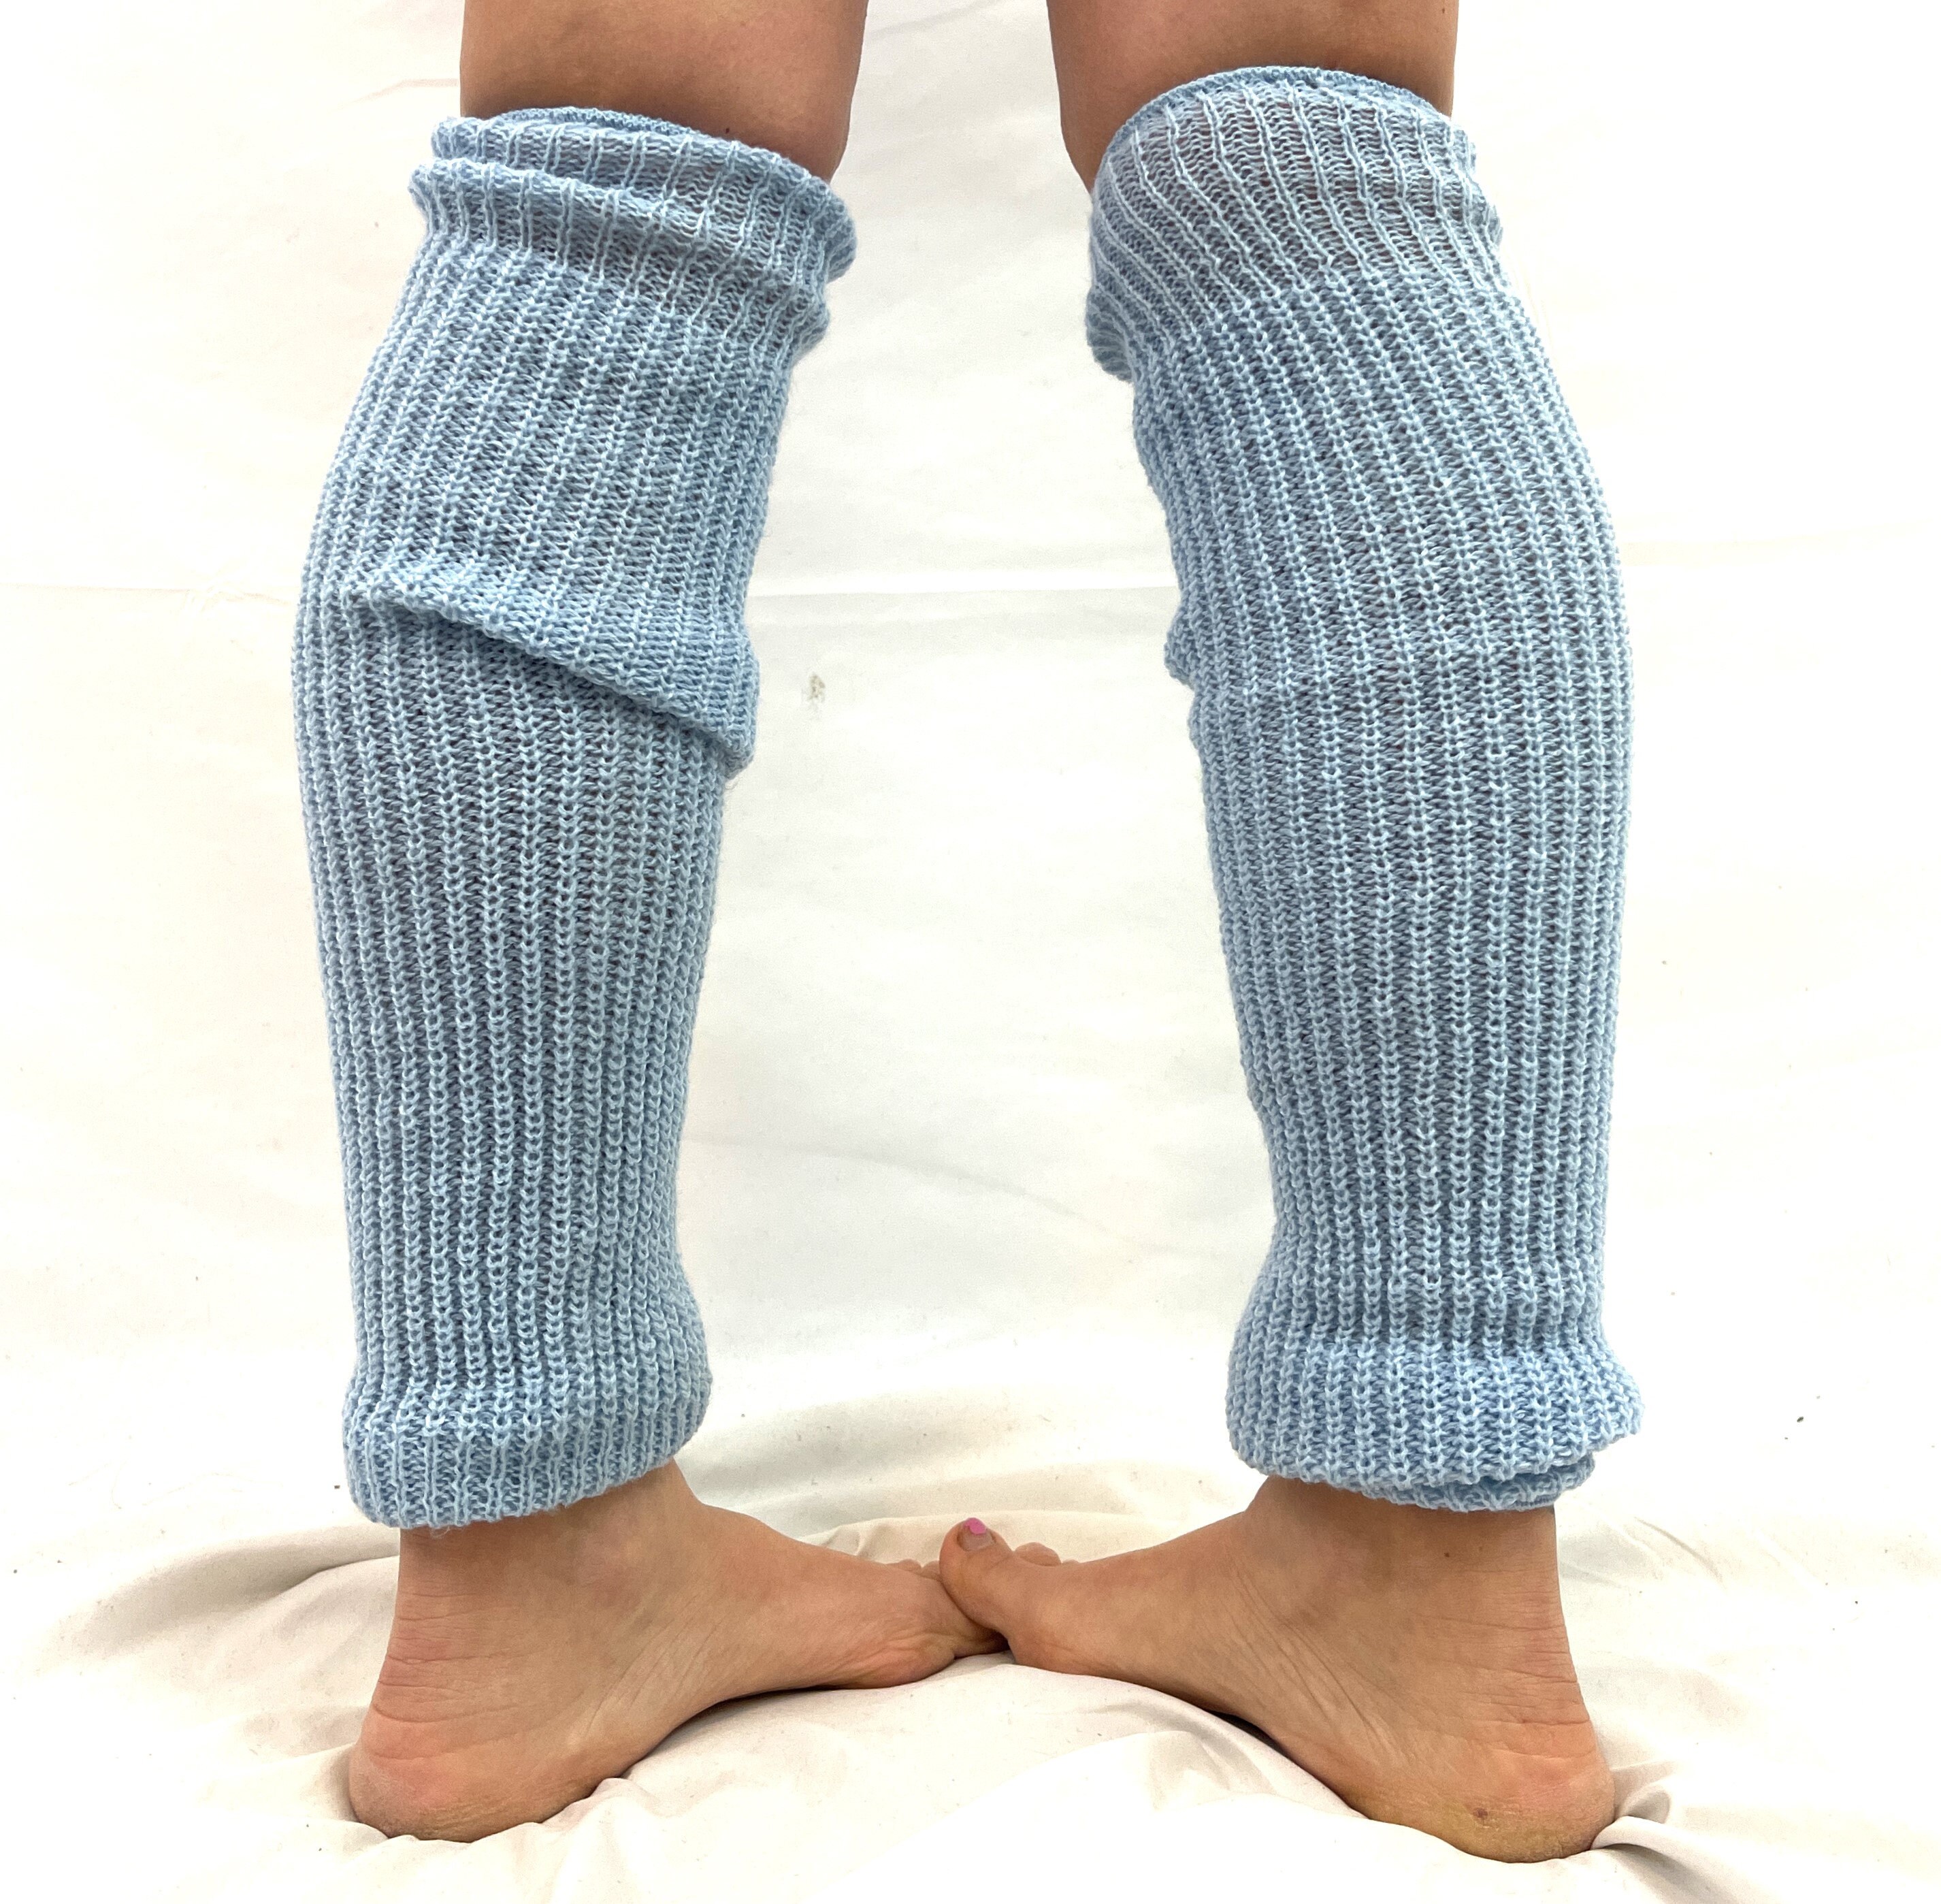 Vintage 80s 1980s Workout Leg Warmers -  Canada